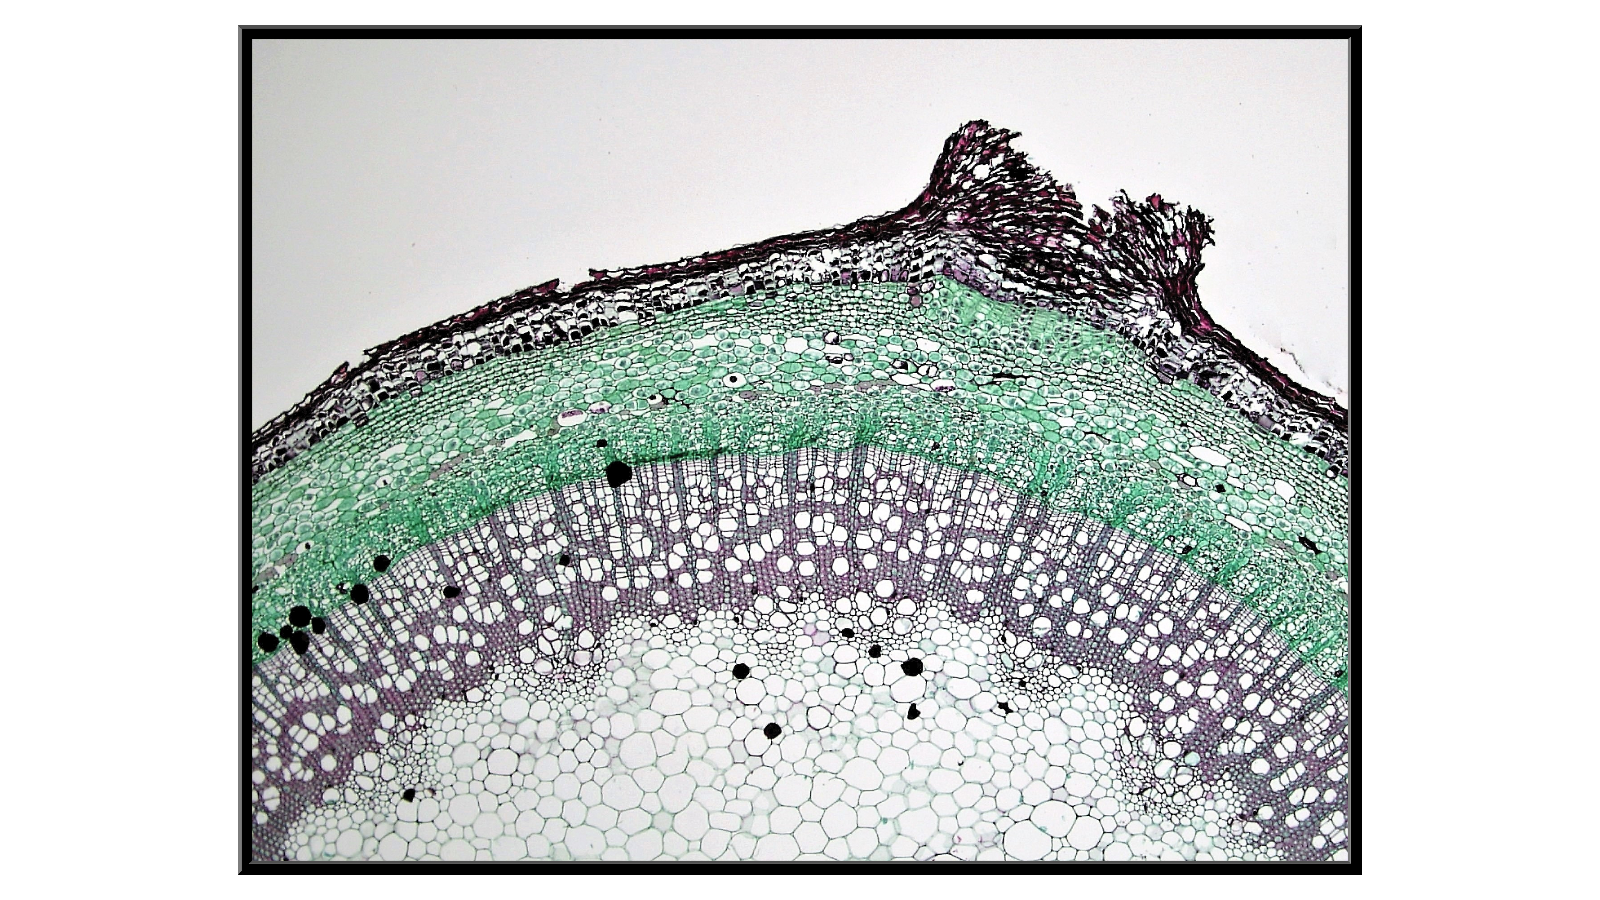 Cross-section through a cracked Elder twig